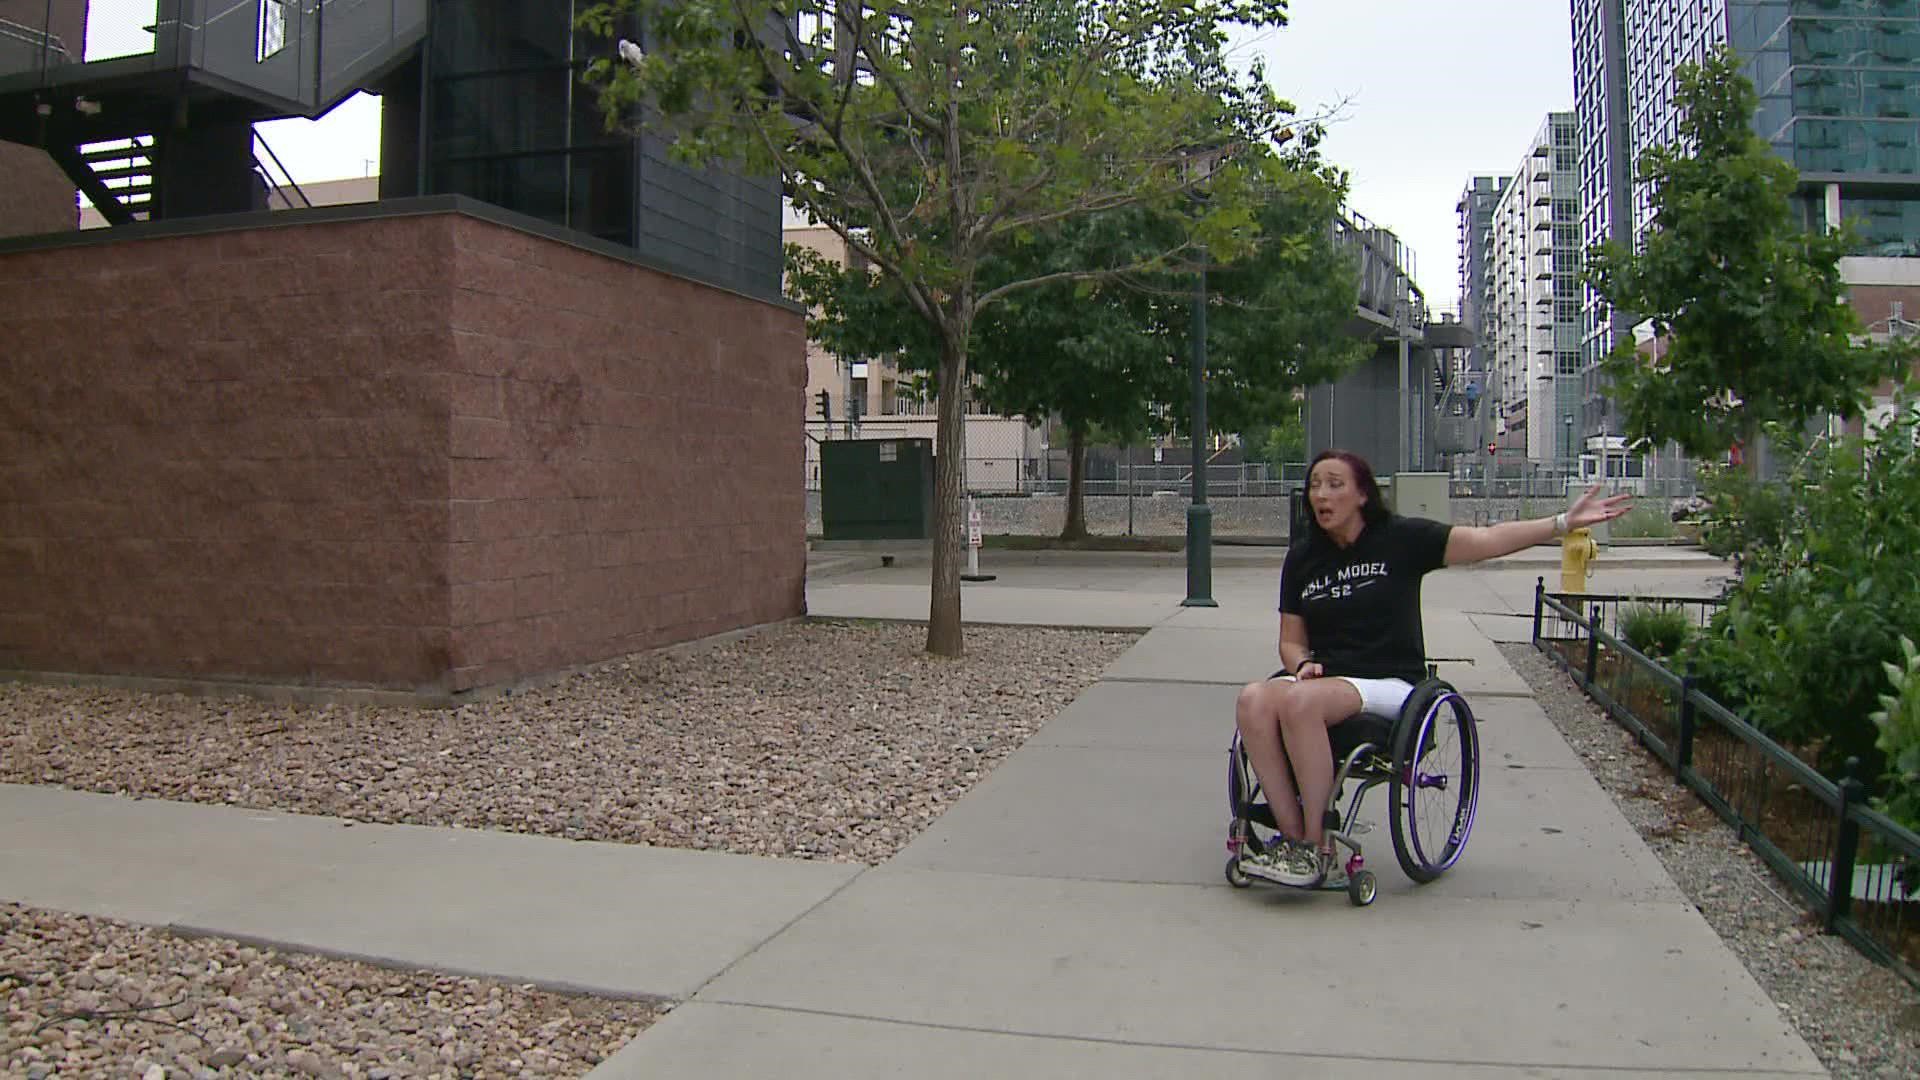 Van Dyken uses a wheelchair and relies on the elevators to access a pedestrian bridge, arguing that closing them violates the Americans with Disabilities Act.